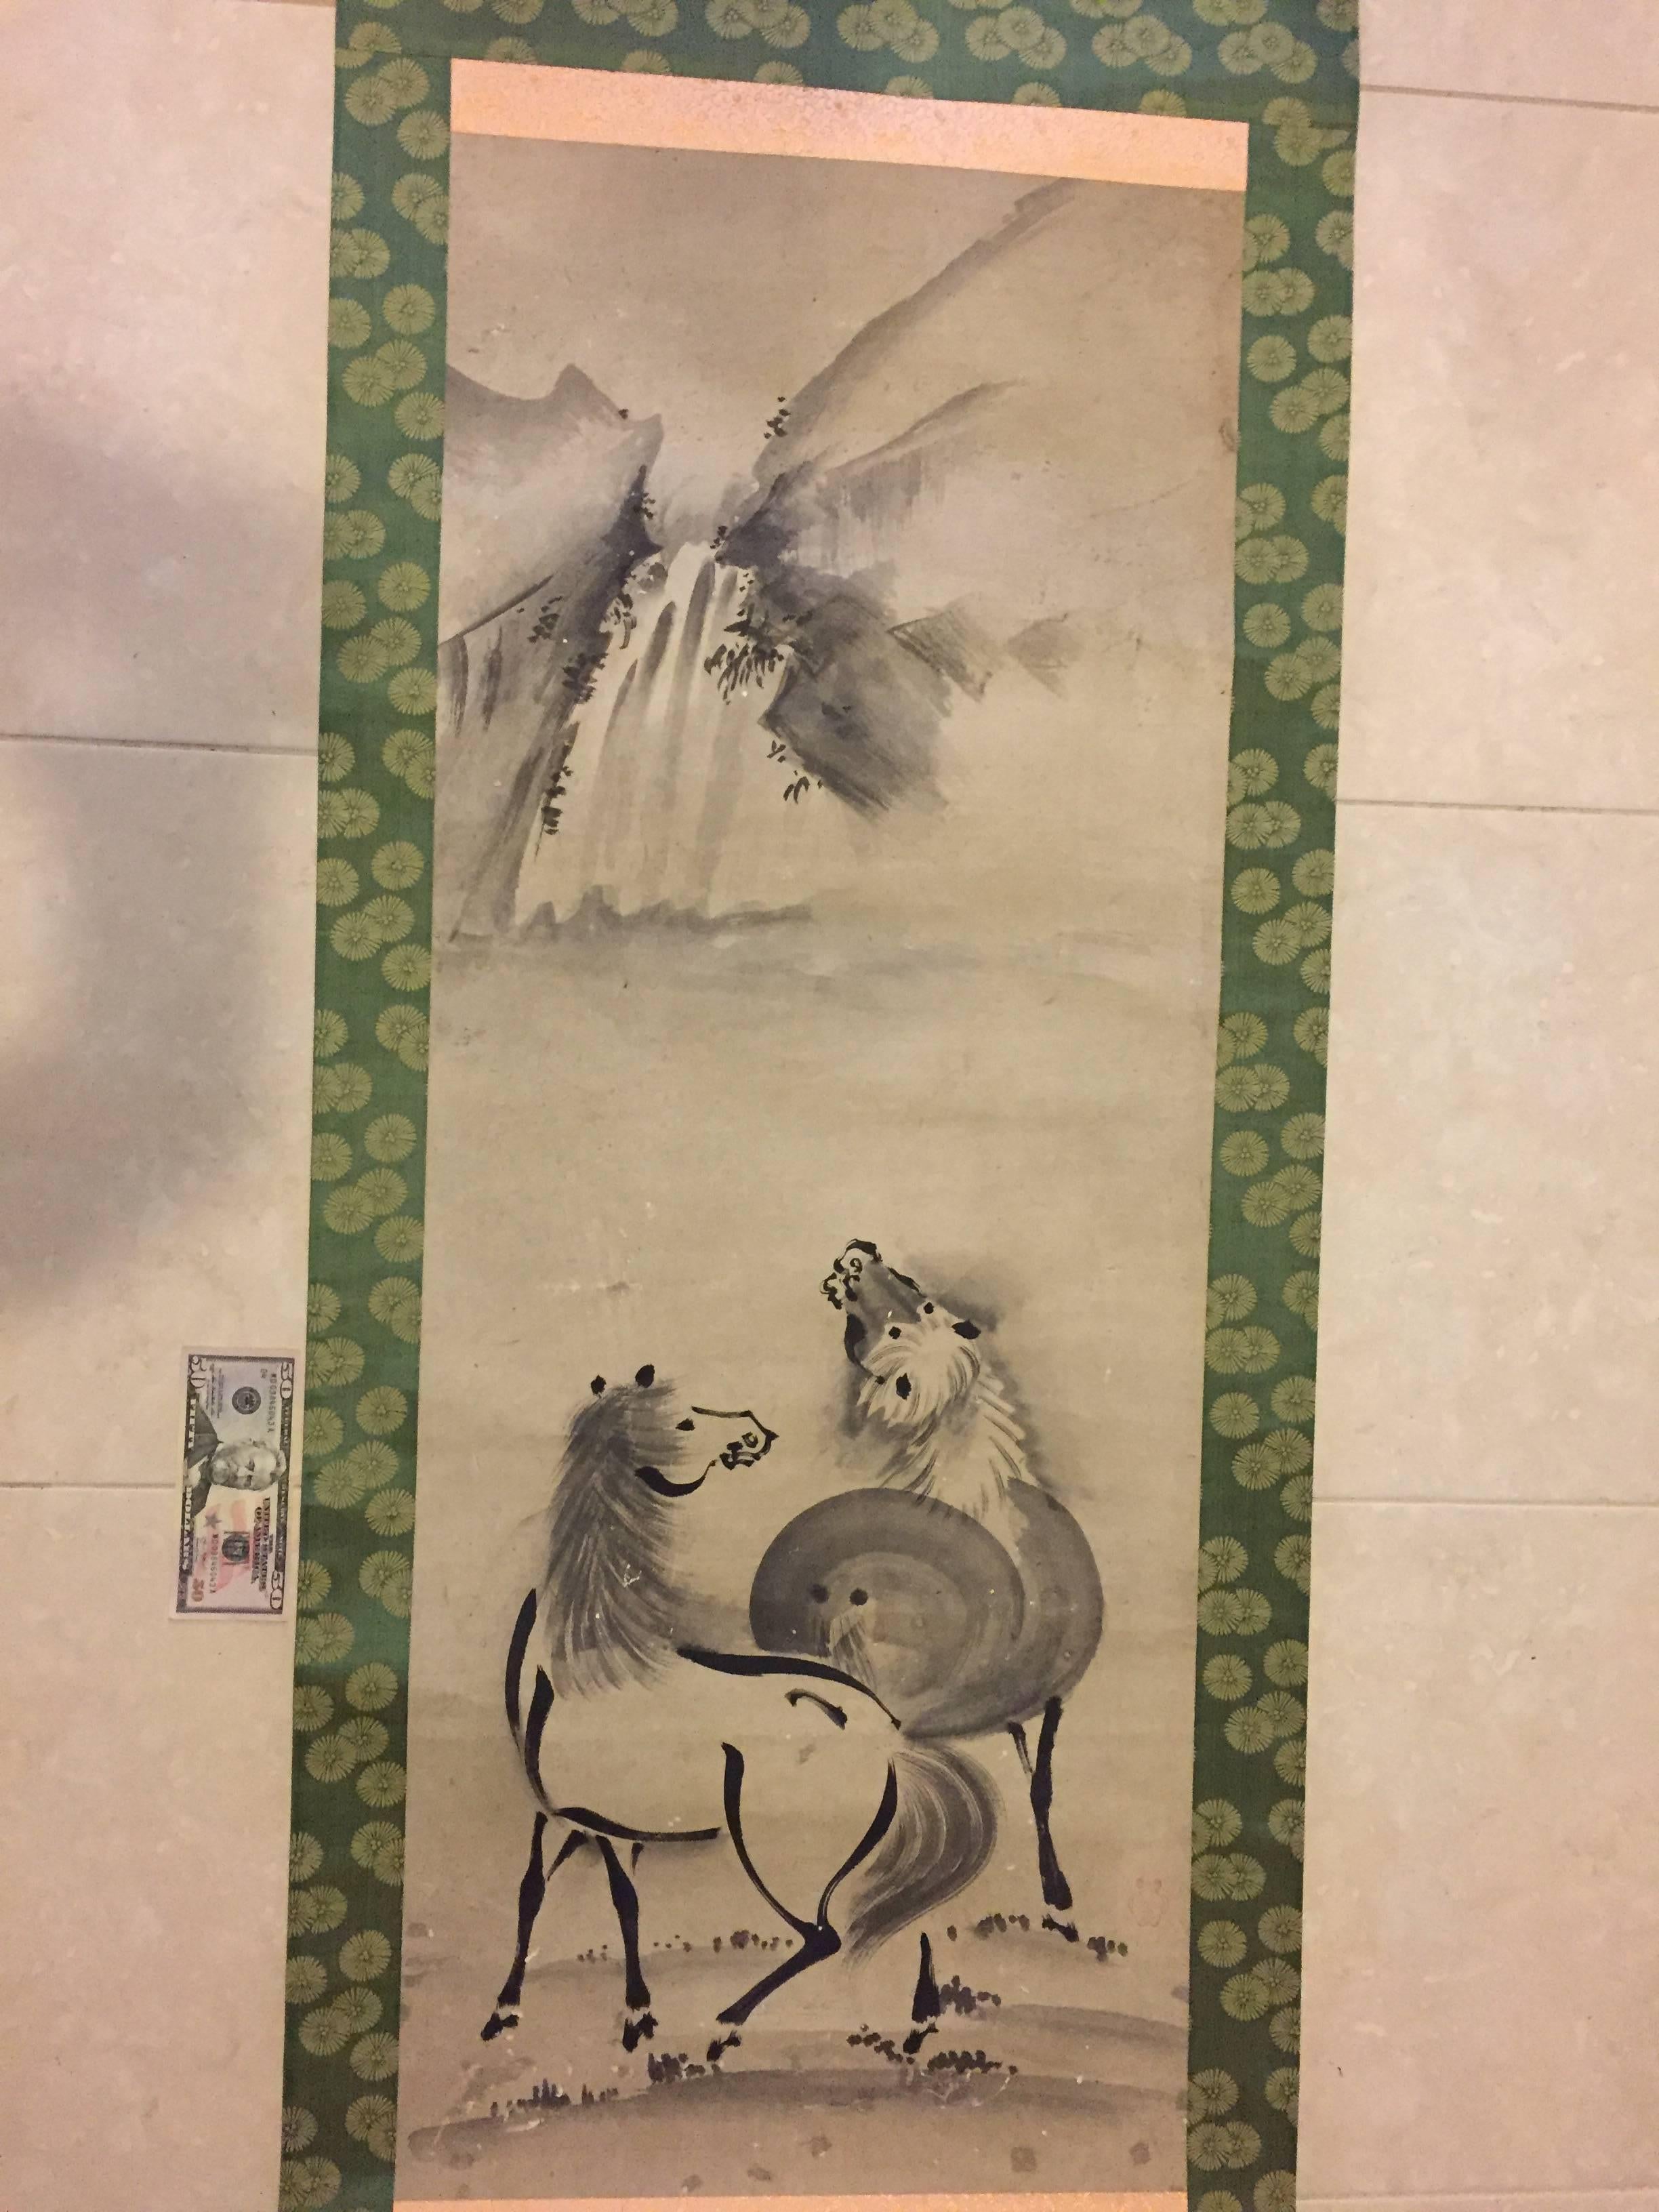 Japan, a hand painting on paper scroll of a waterfall with two horses; Kano style, signed on lower left.

Period:  Late Taisho to early Showa period, (1920-1930).

Dimensions: 25.5 inches wide and 78 inches length.

Enticing subject matter, this